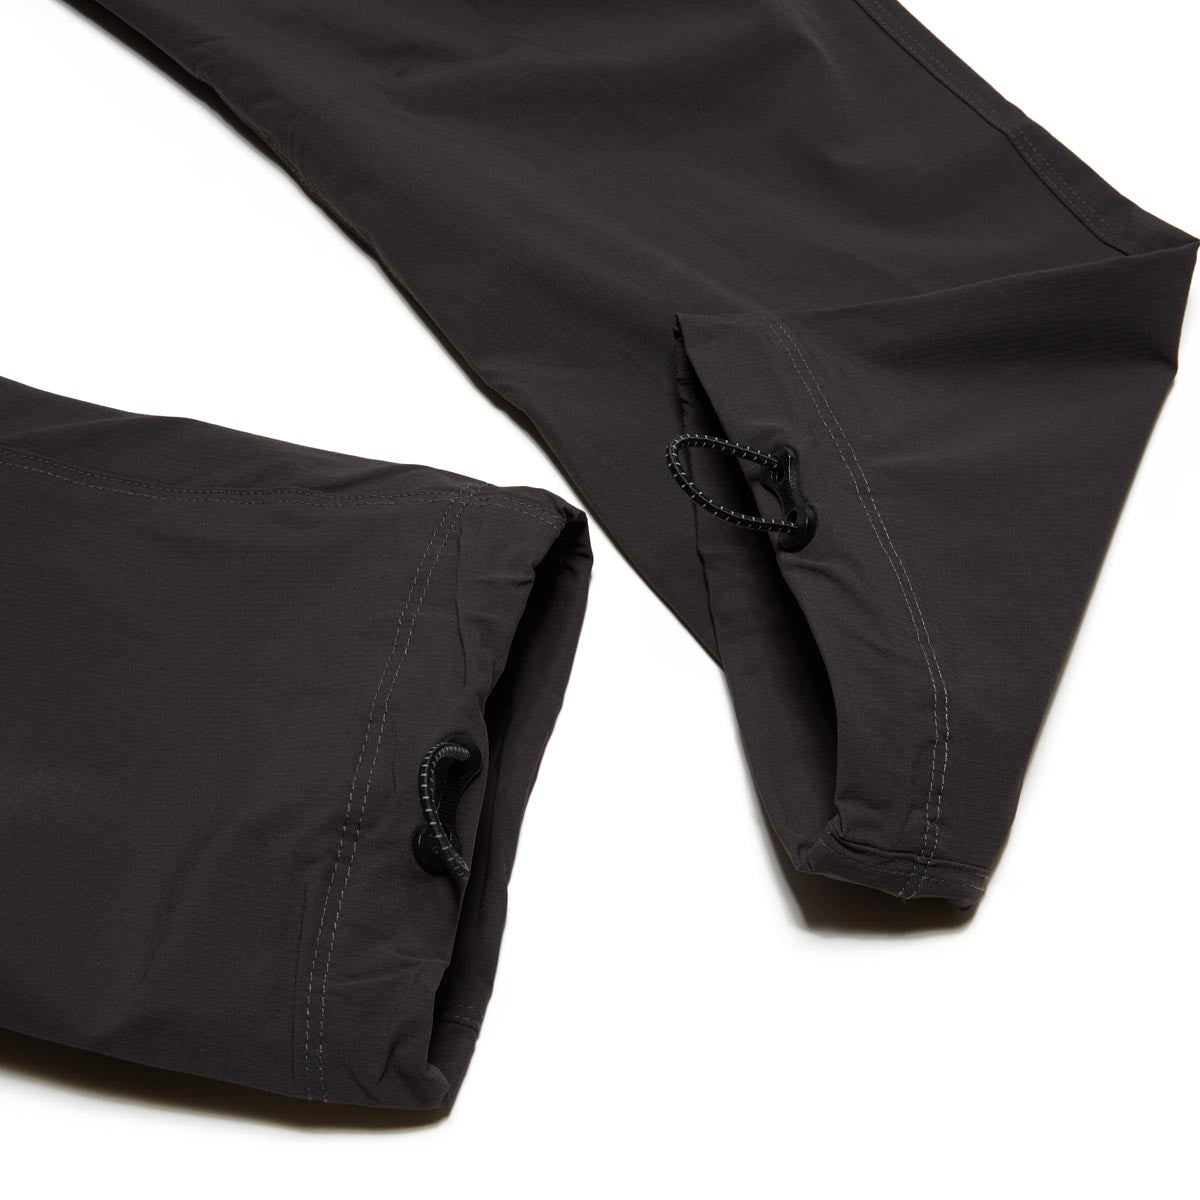 Kennedy The Ascension Cargo Pants - Charcoal image 5